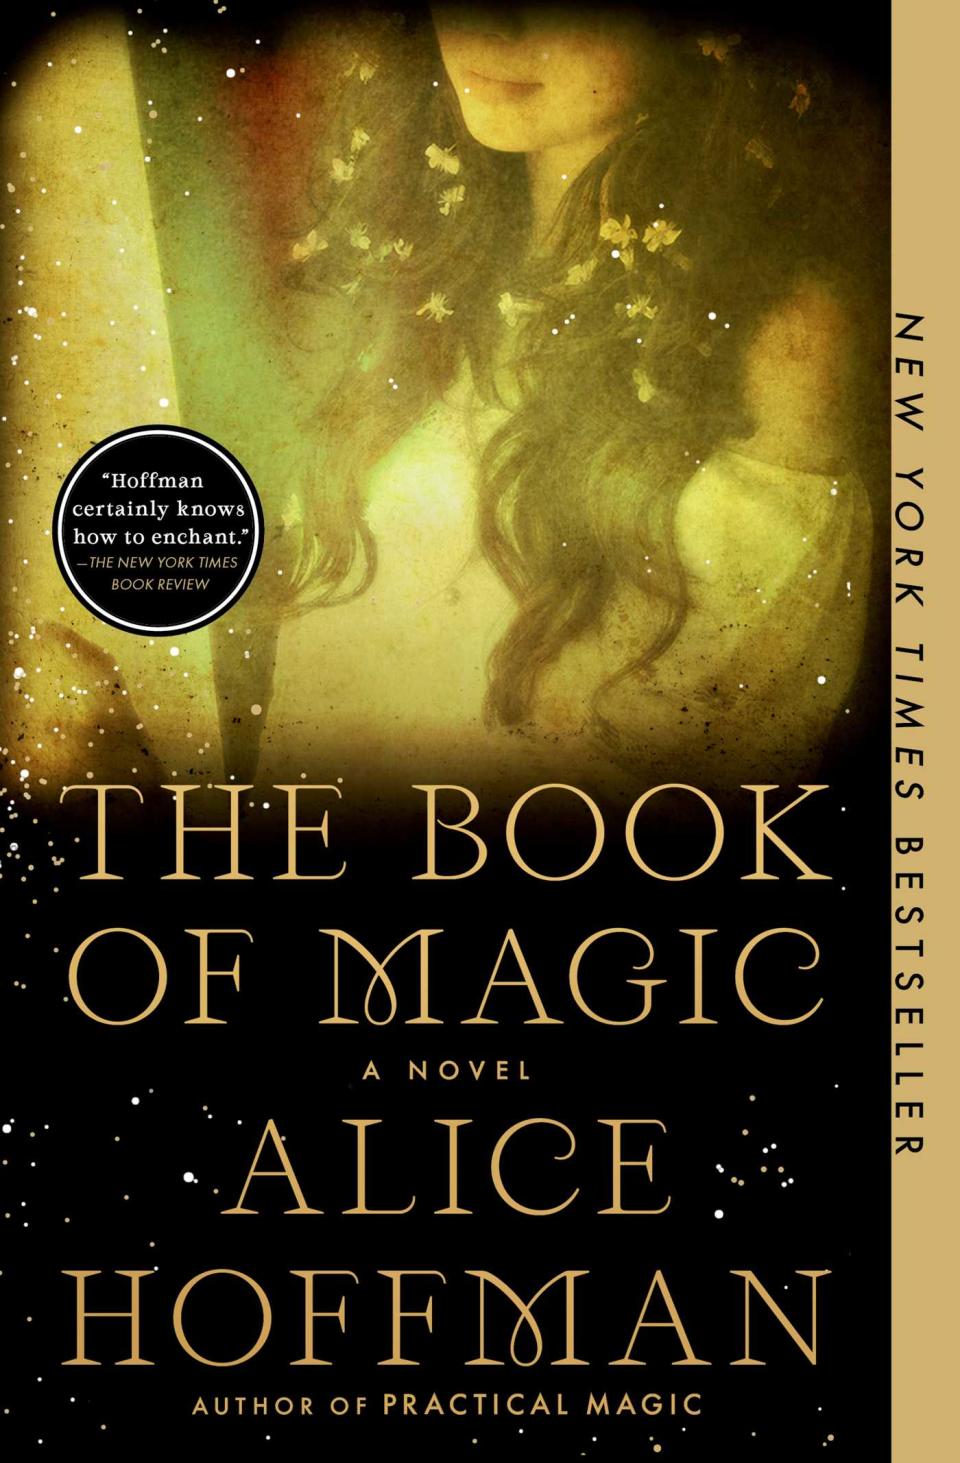 The Book of Magic by Alice Hoffman